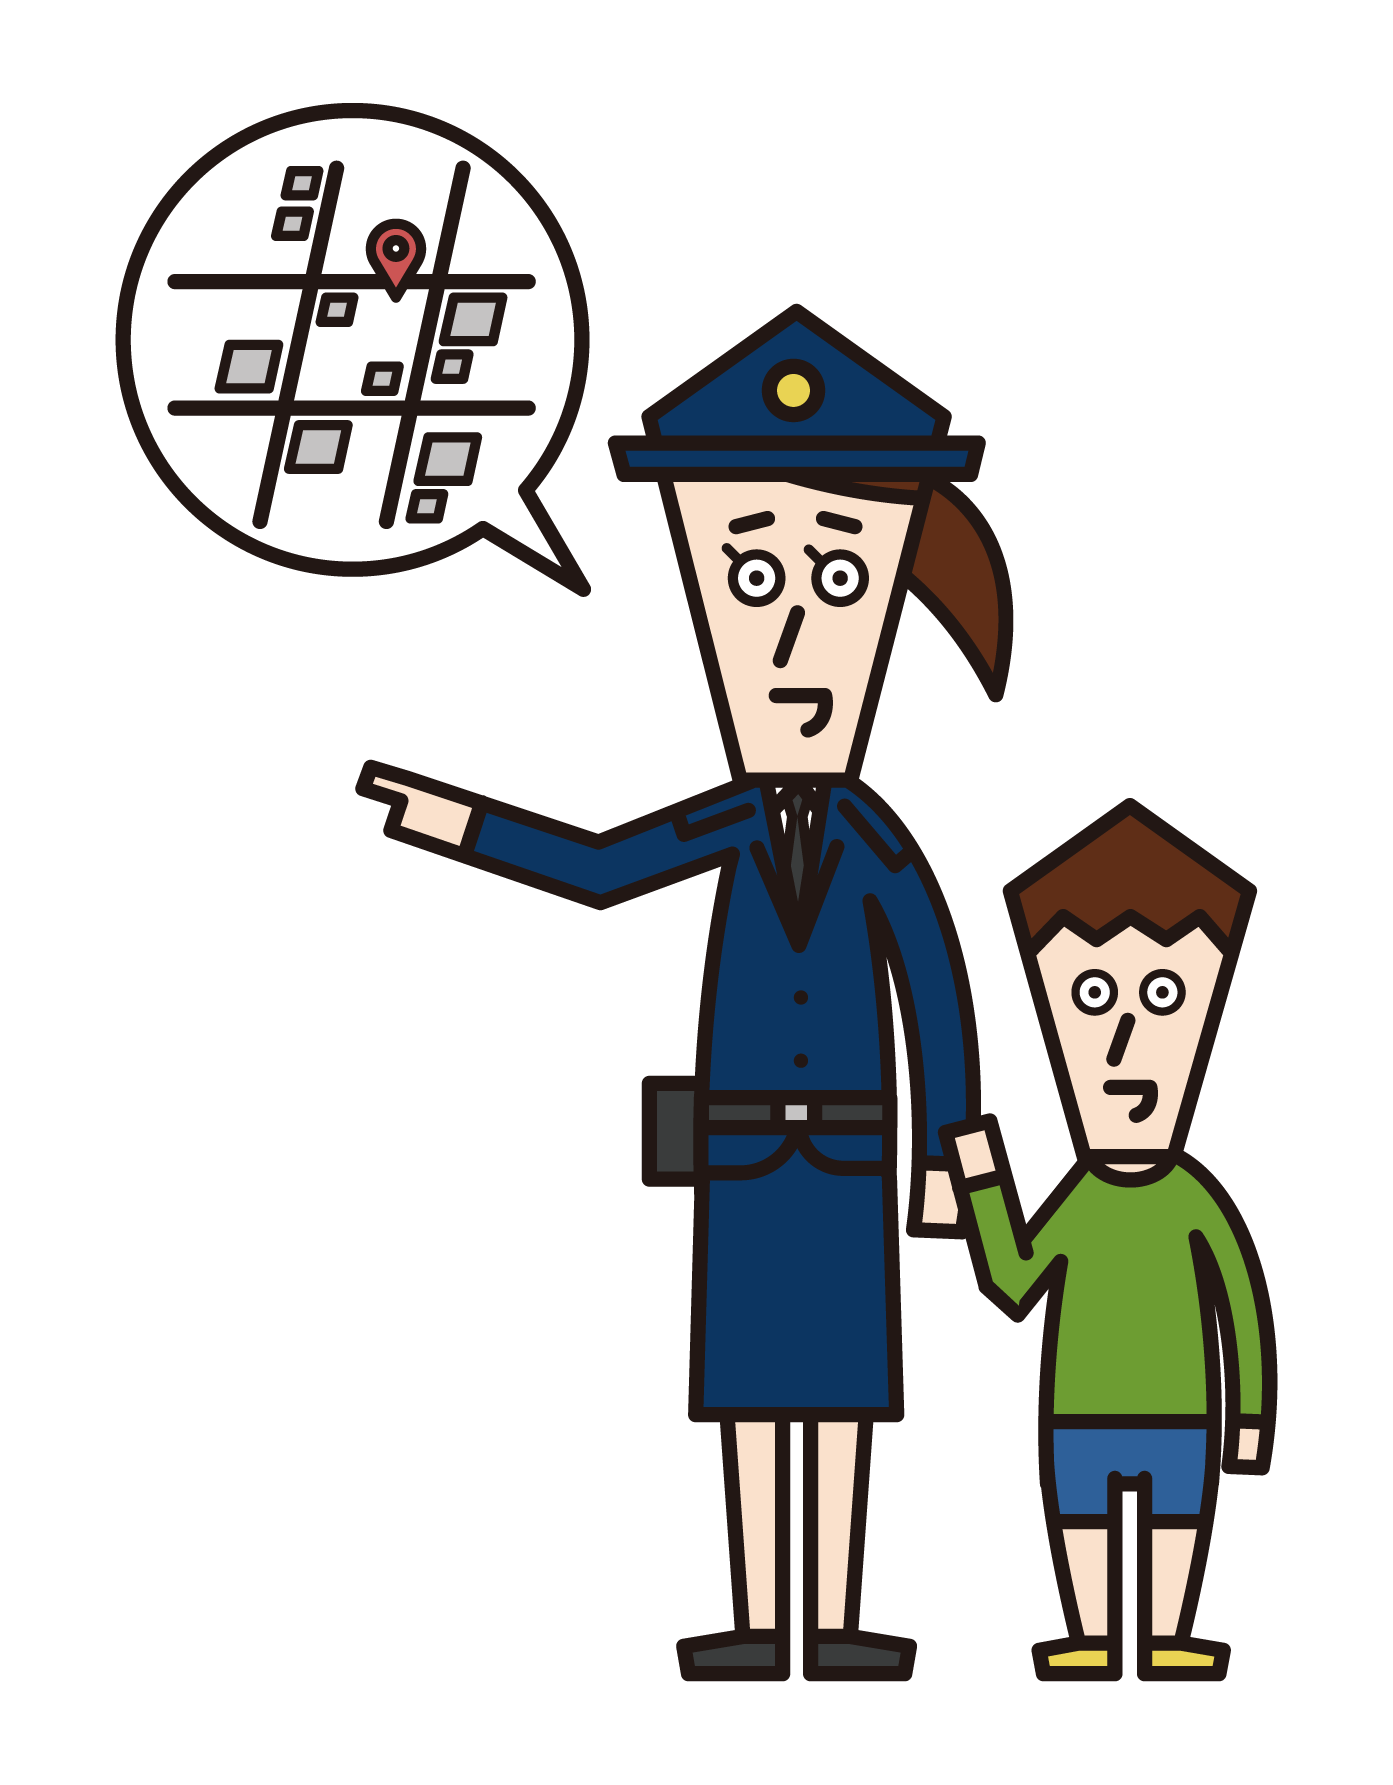 Illustration of a child (girl) asking a police officer for directions